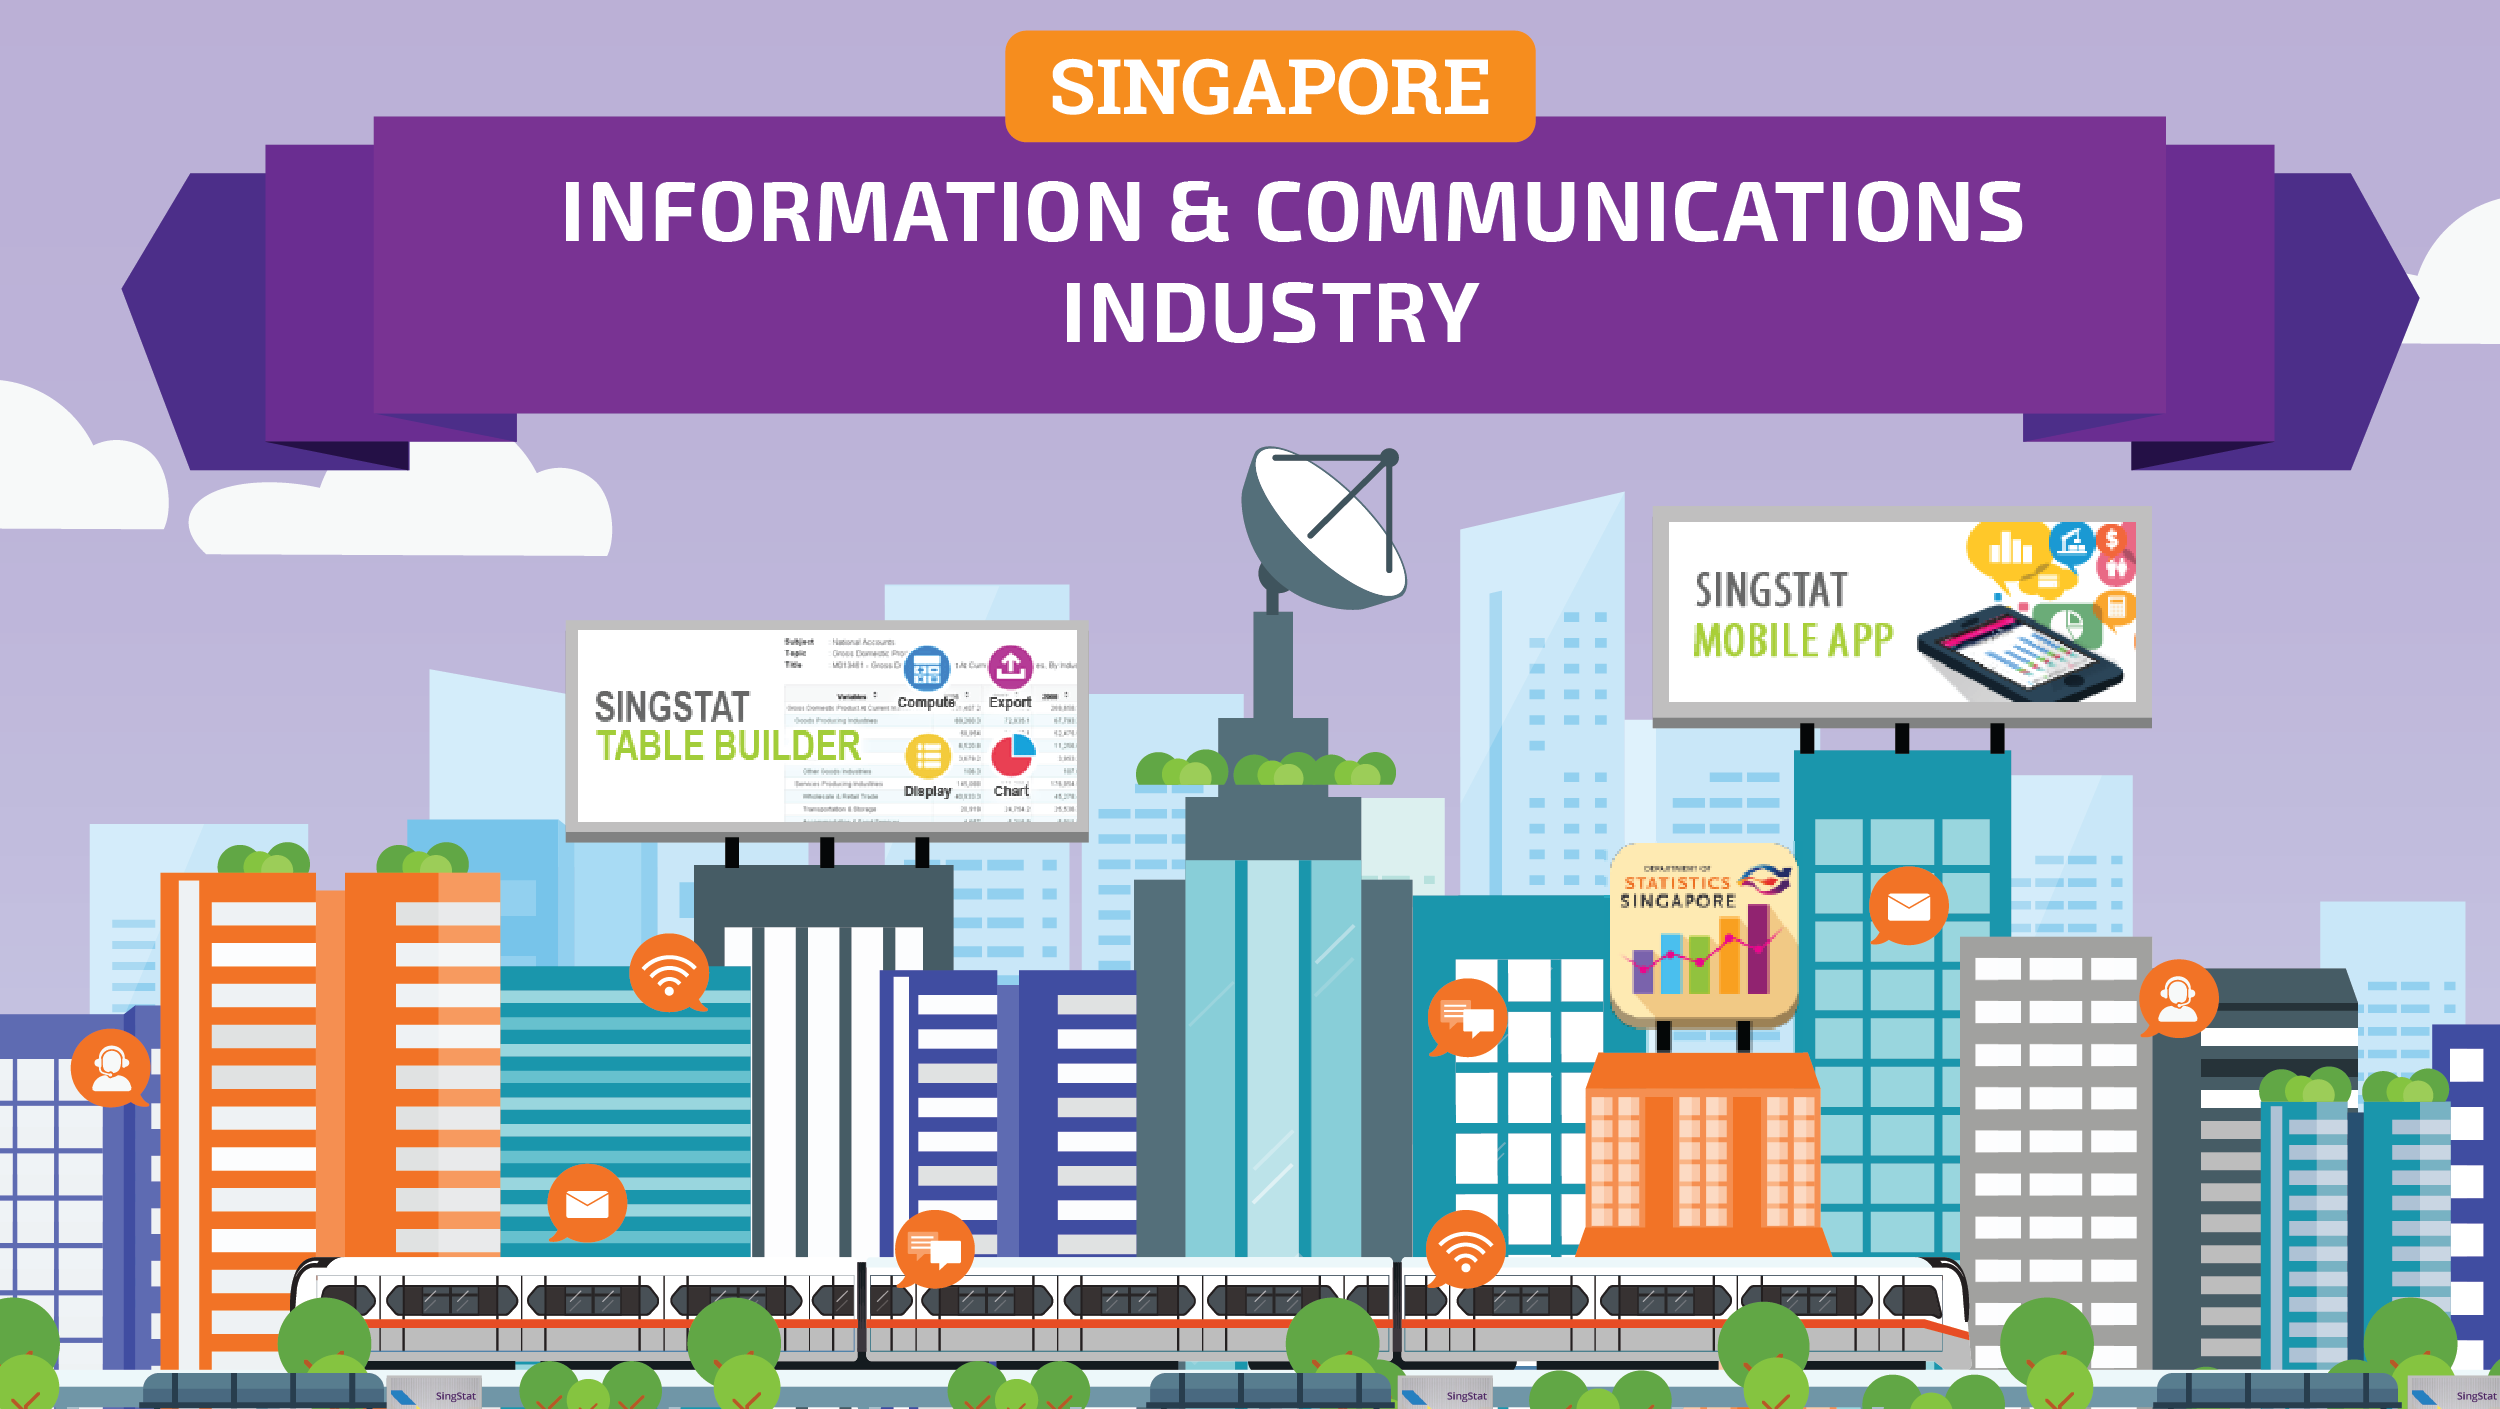 Singapore Information & Communications Industry 2021